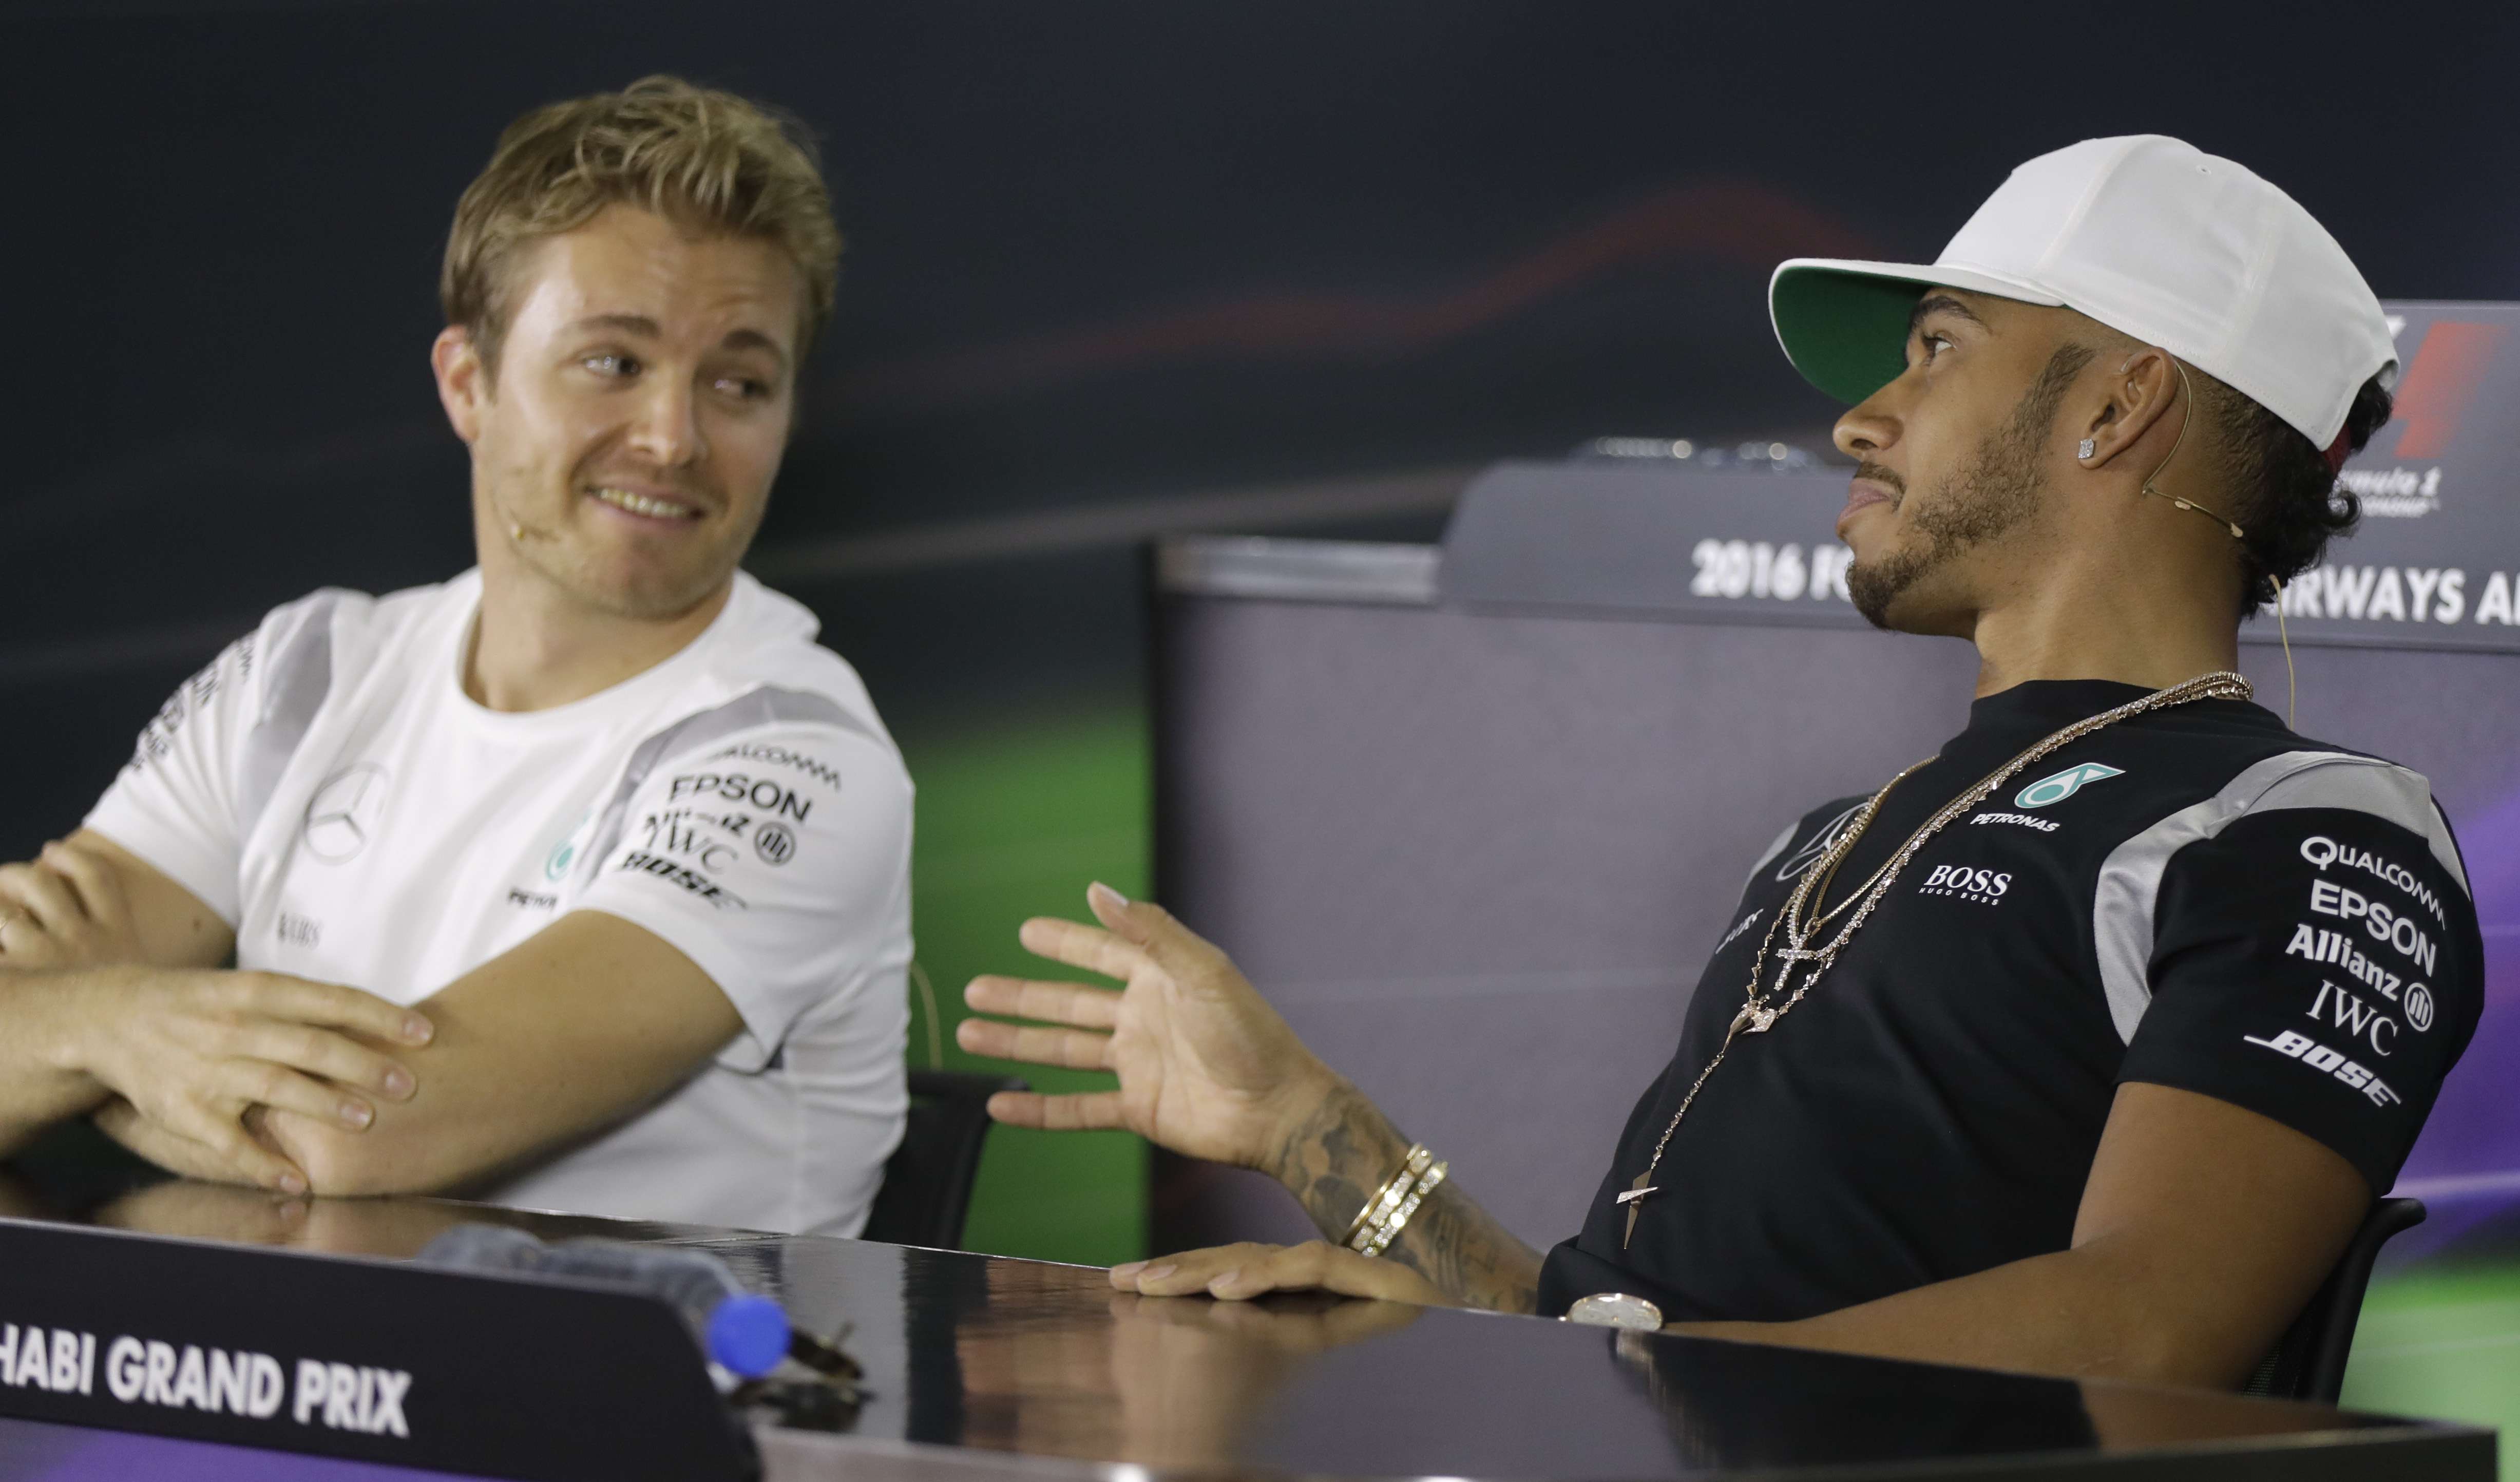 Mercedes drivers Lewis Hamilton and Nico Rosberg discuss the pit crew swap at a press conference ahead of practice for Sunday’s Abu Dhabi Grand Prix. Photo: AP